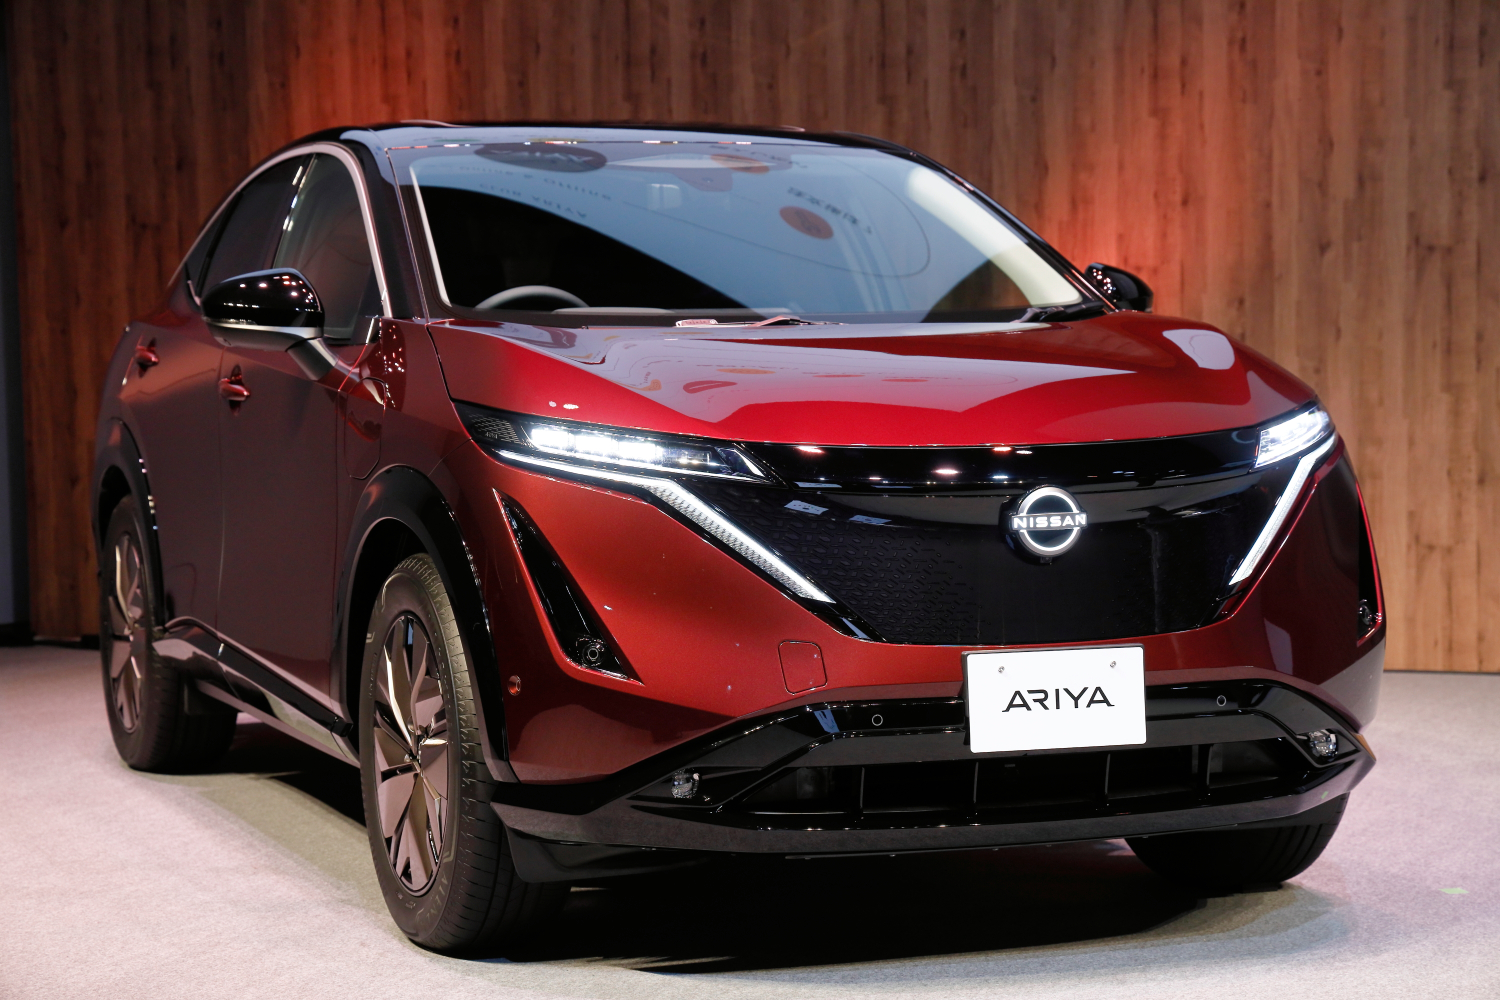 The Nissan Ariya in red at the Expo 2020 Dubai